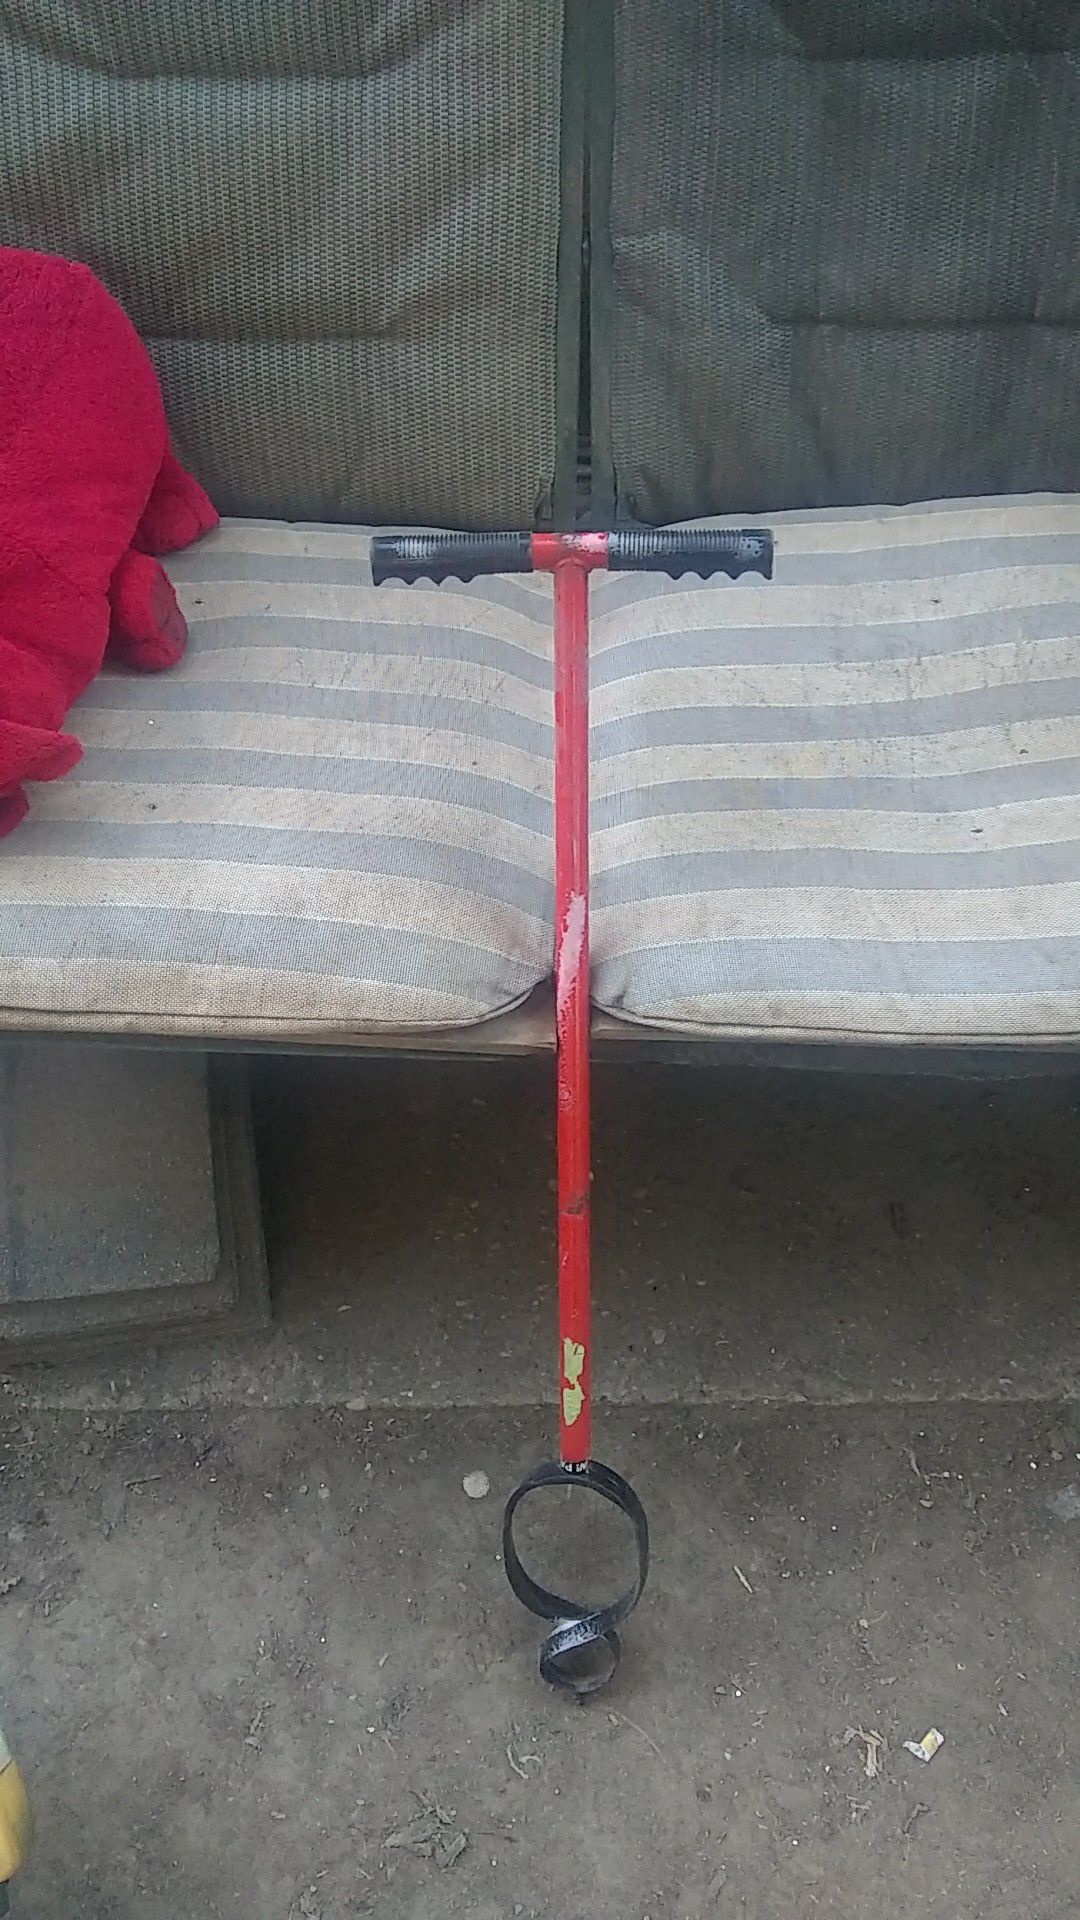 Auger for planting flowers,30" long,unused.